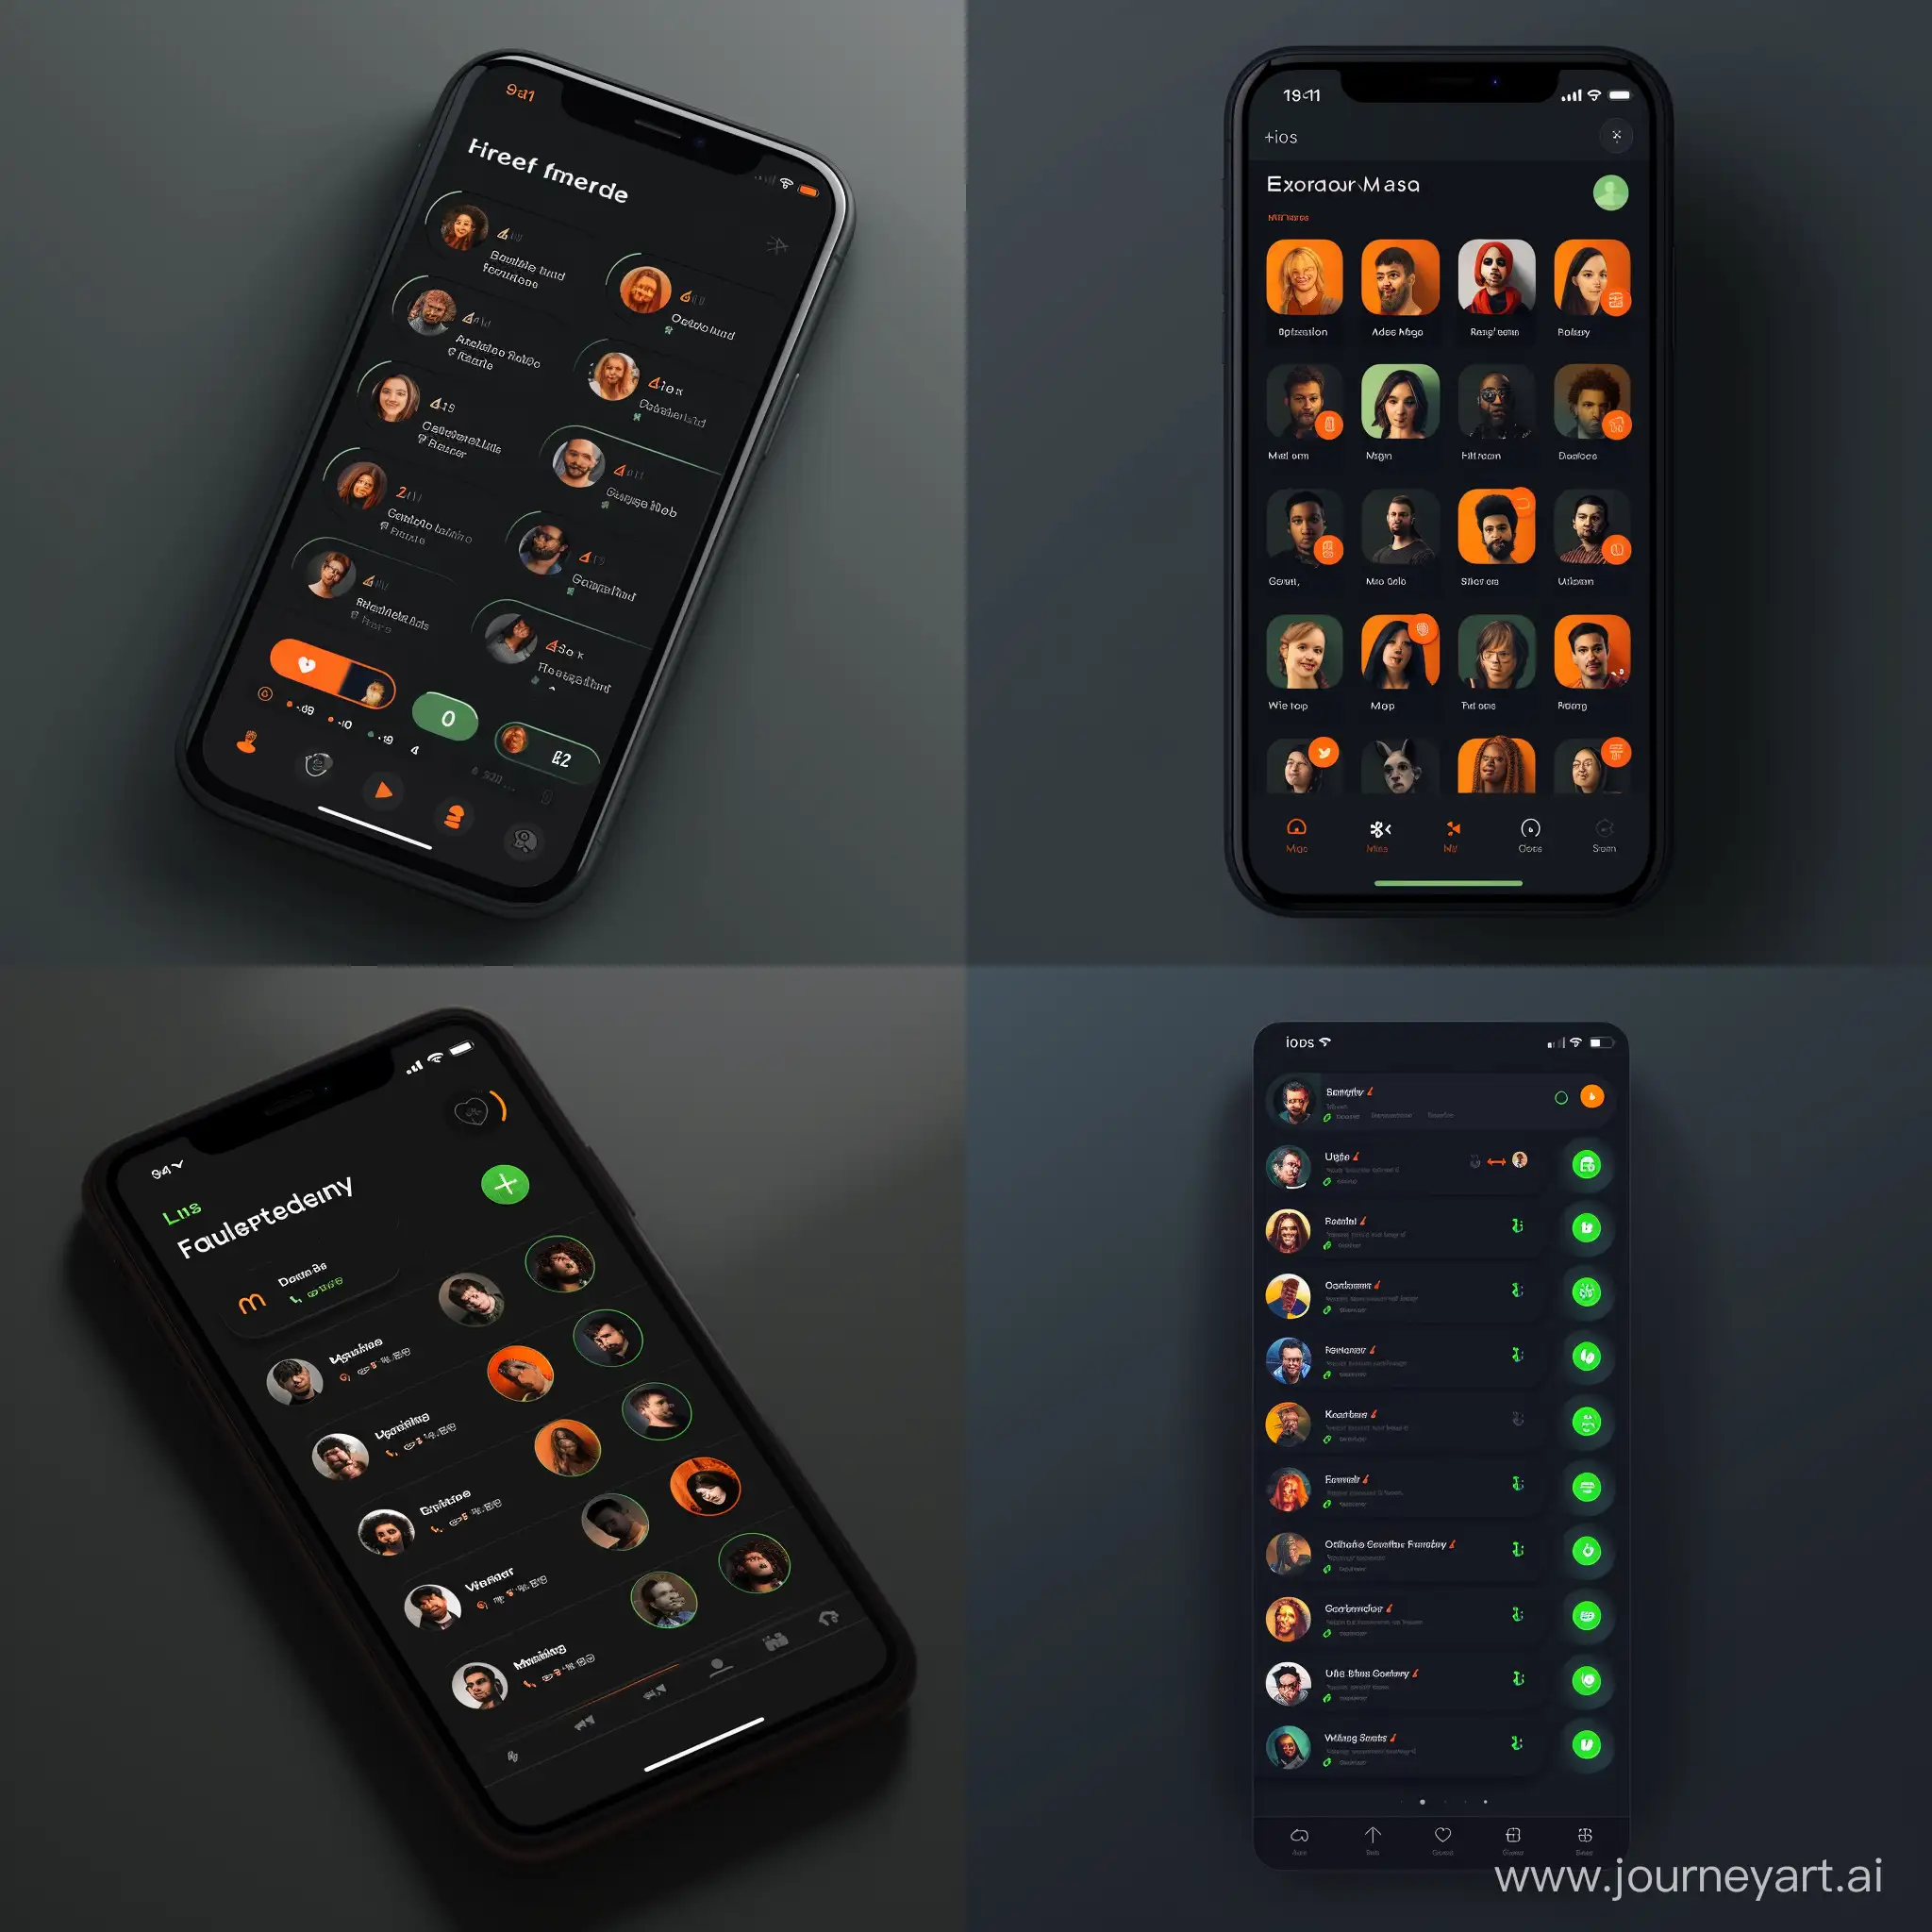 modern ios app list of friends with icons
main color - dark
color 1 - green
color 2 - orange
